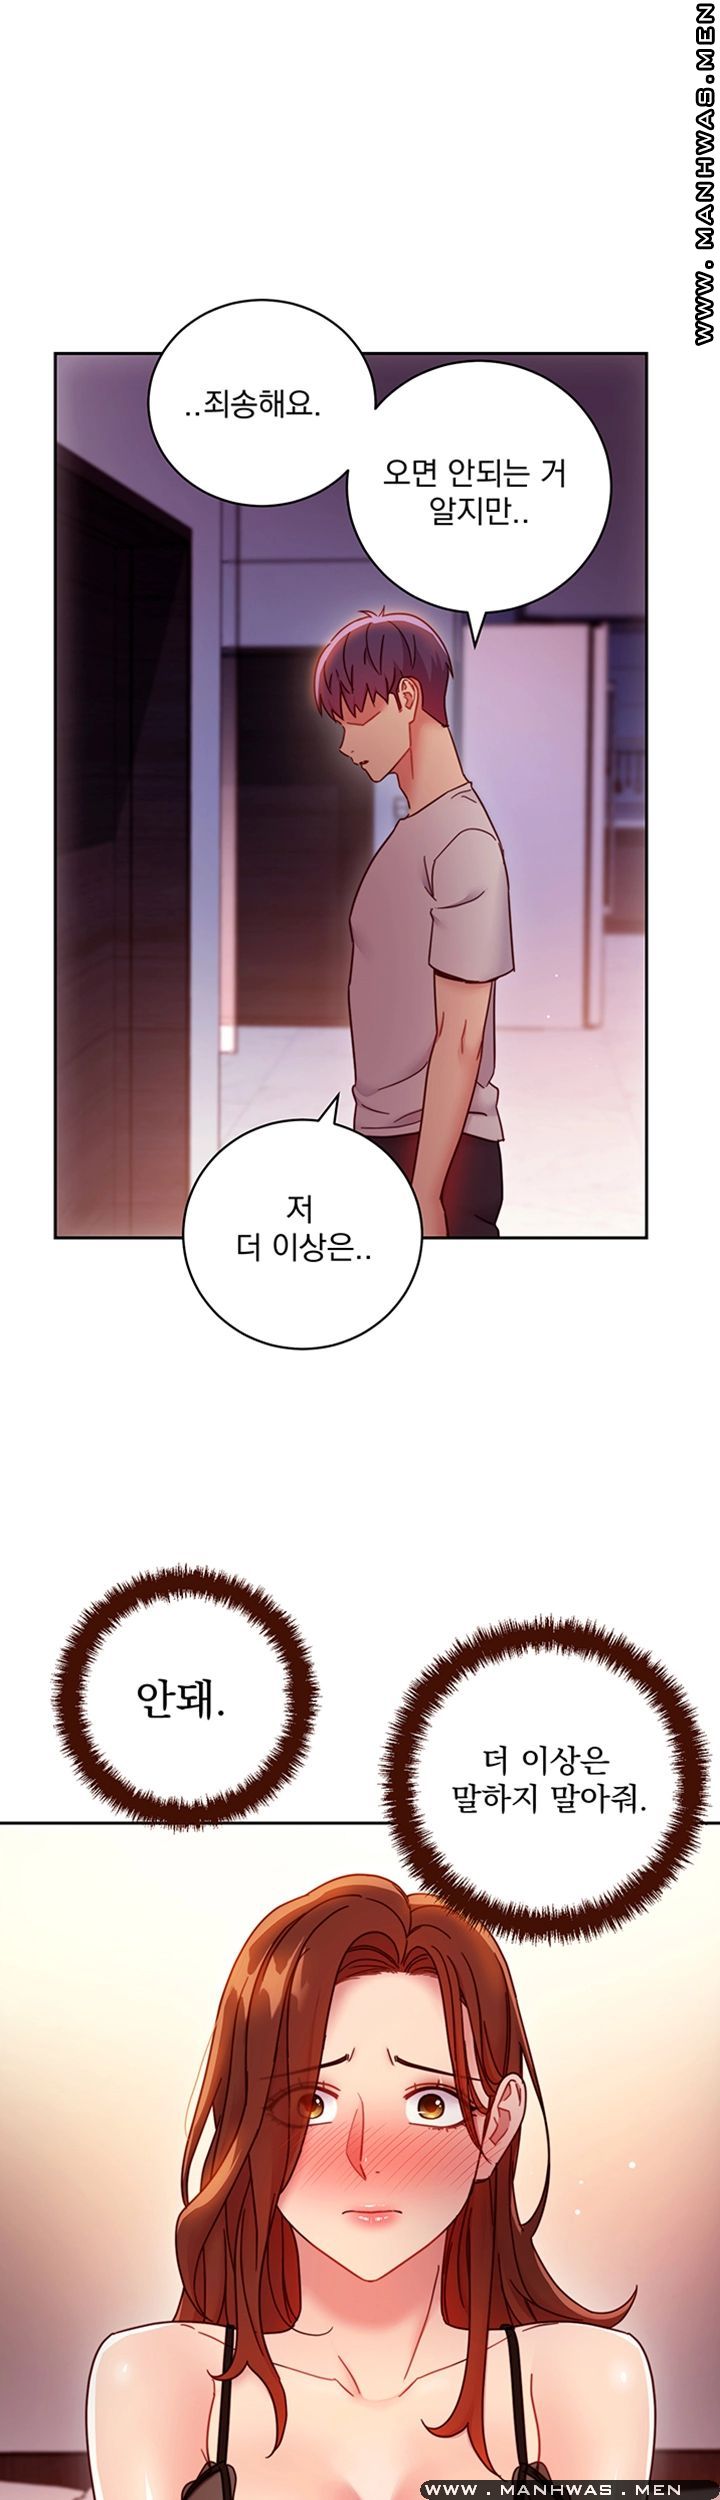 Stepmother s past. Stepmother friends Манга. Stepmother friends manhwa. Stepmother friends read 57 Chapter. Daughter's friend manhwa.